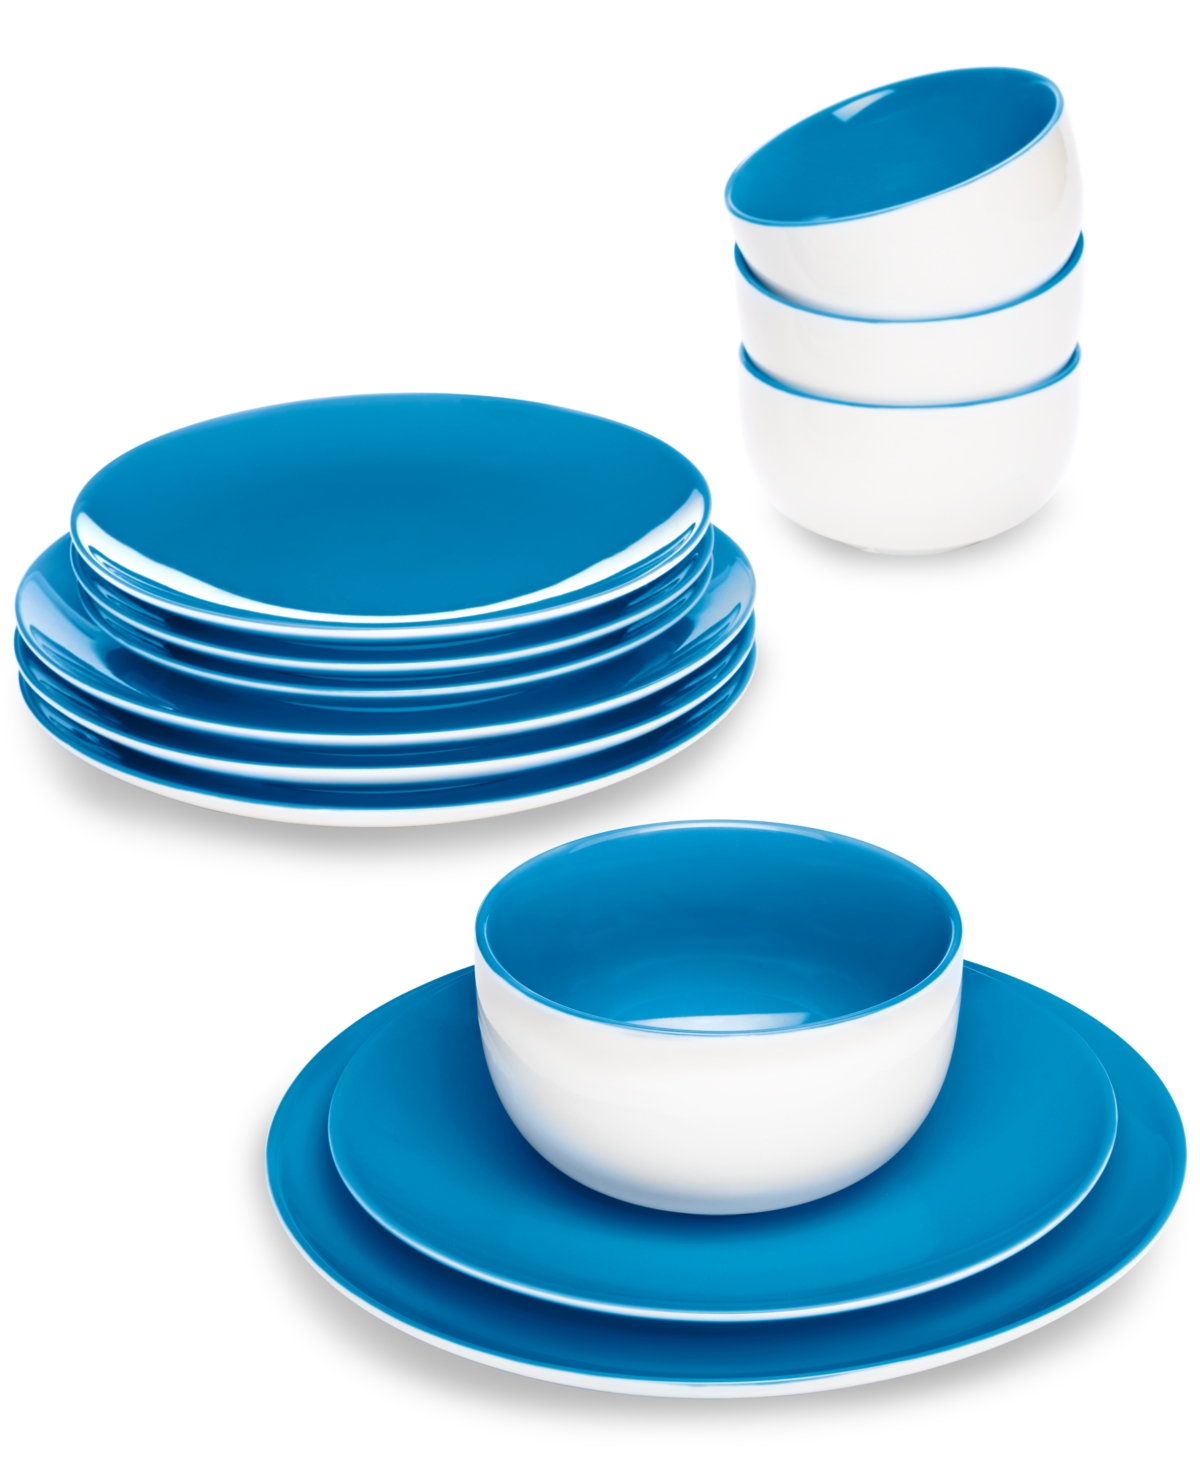 12 Pc. Dinnerware Set, Service for 4, Created for Macy's - Blue